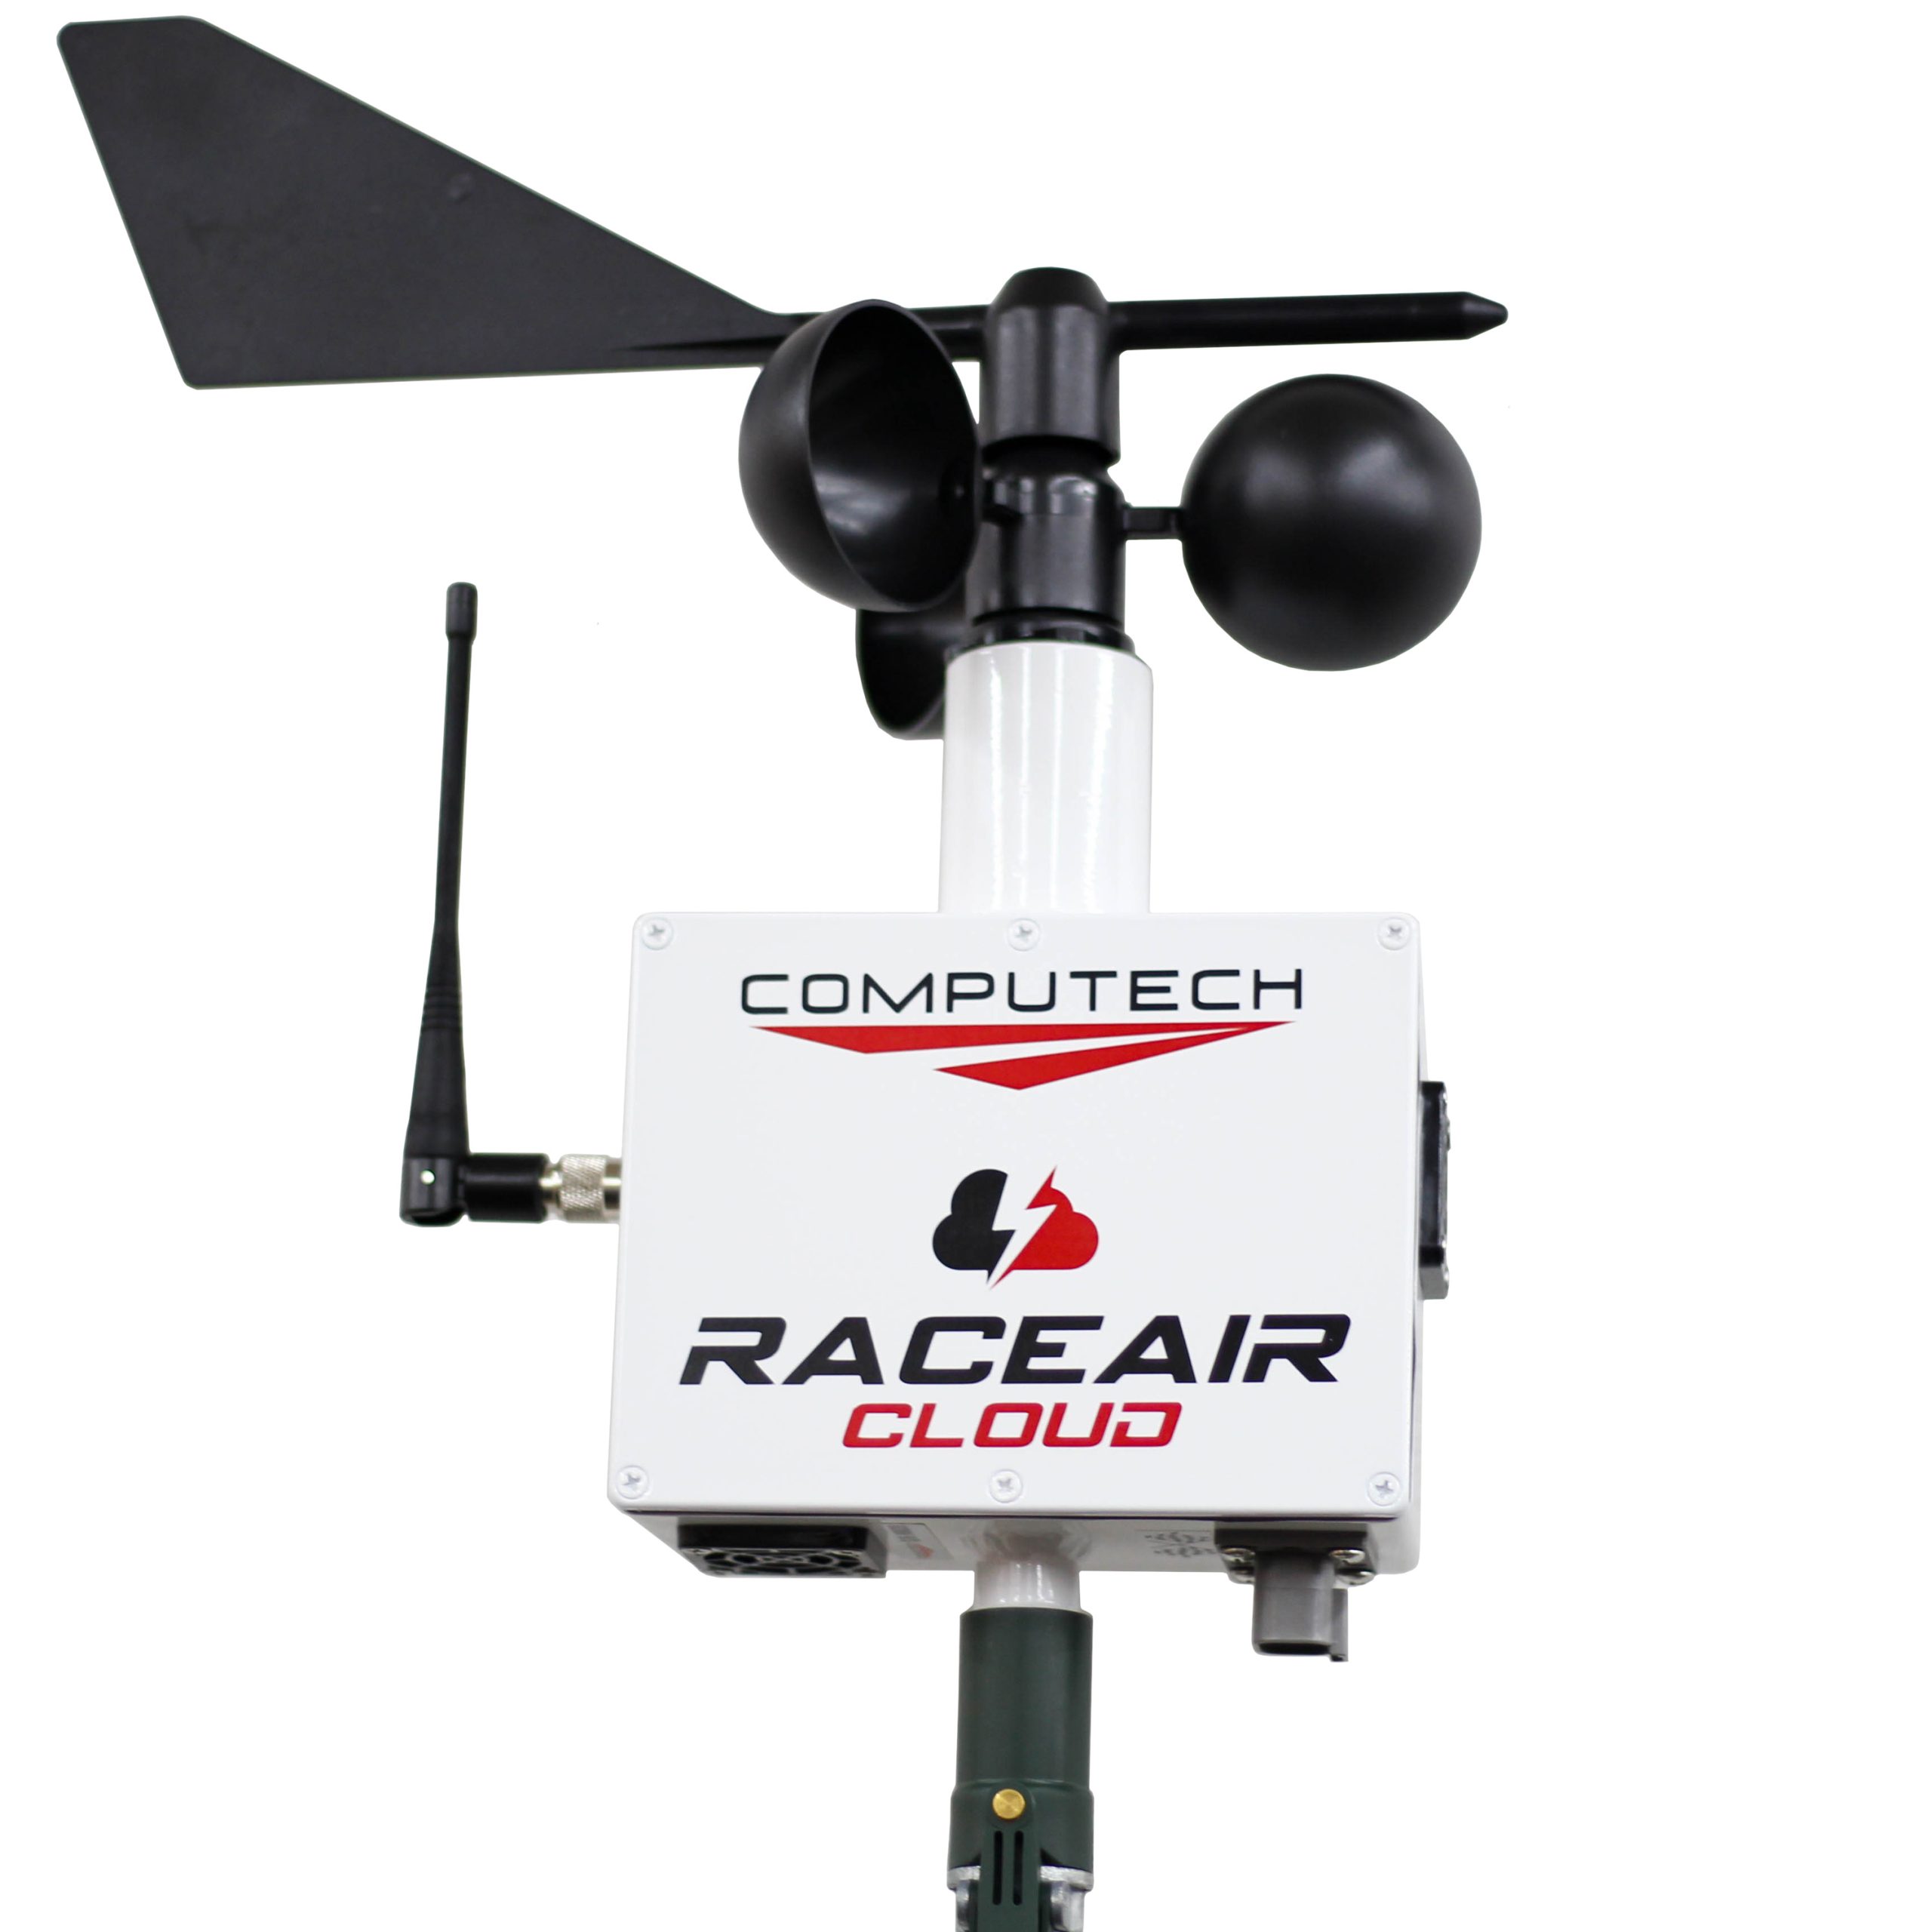 3315 - RaceAir Cloud Deluxe Model with Texting Wind and Paging Trailer Racing Weather Station